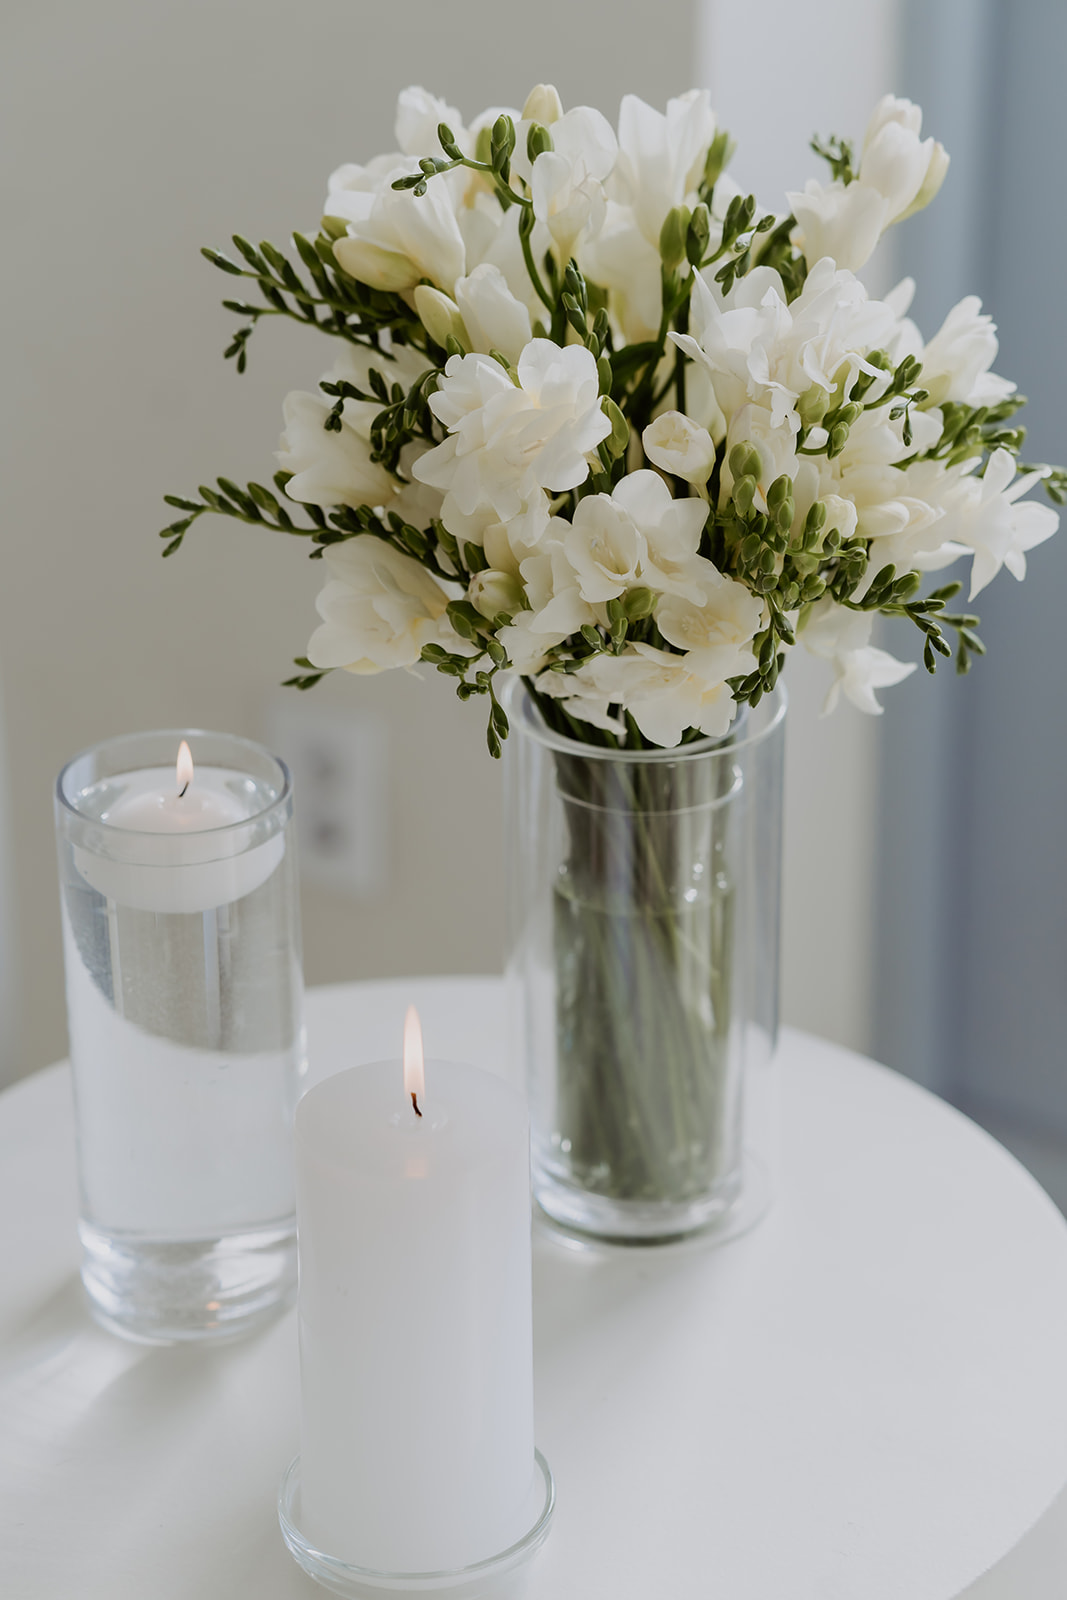 White flowers and a floating candle on a white table